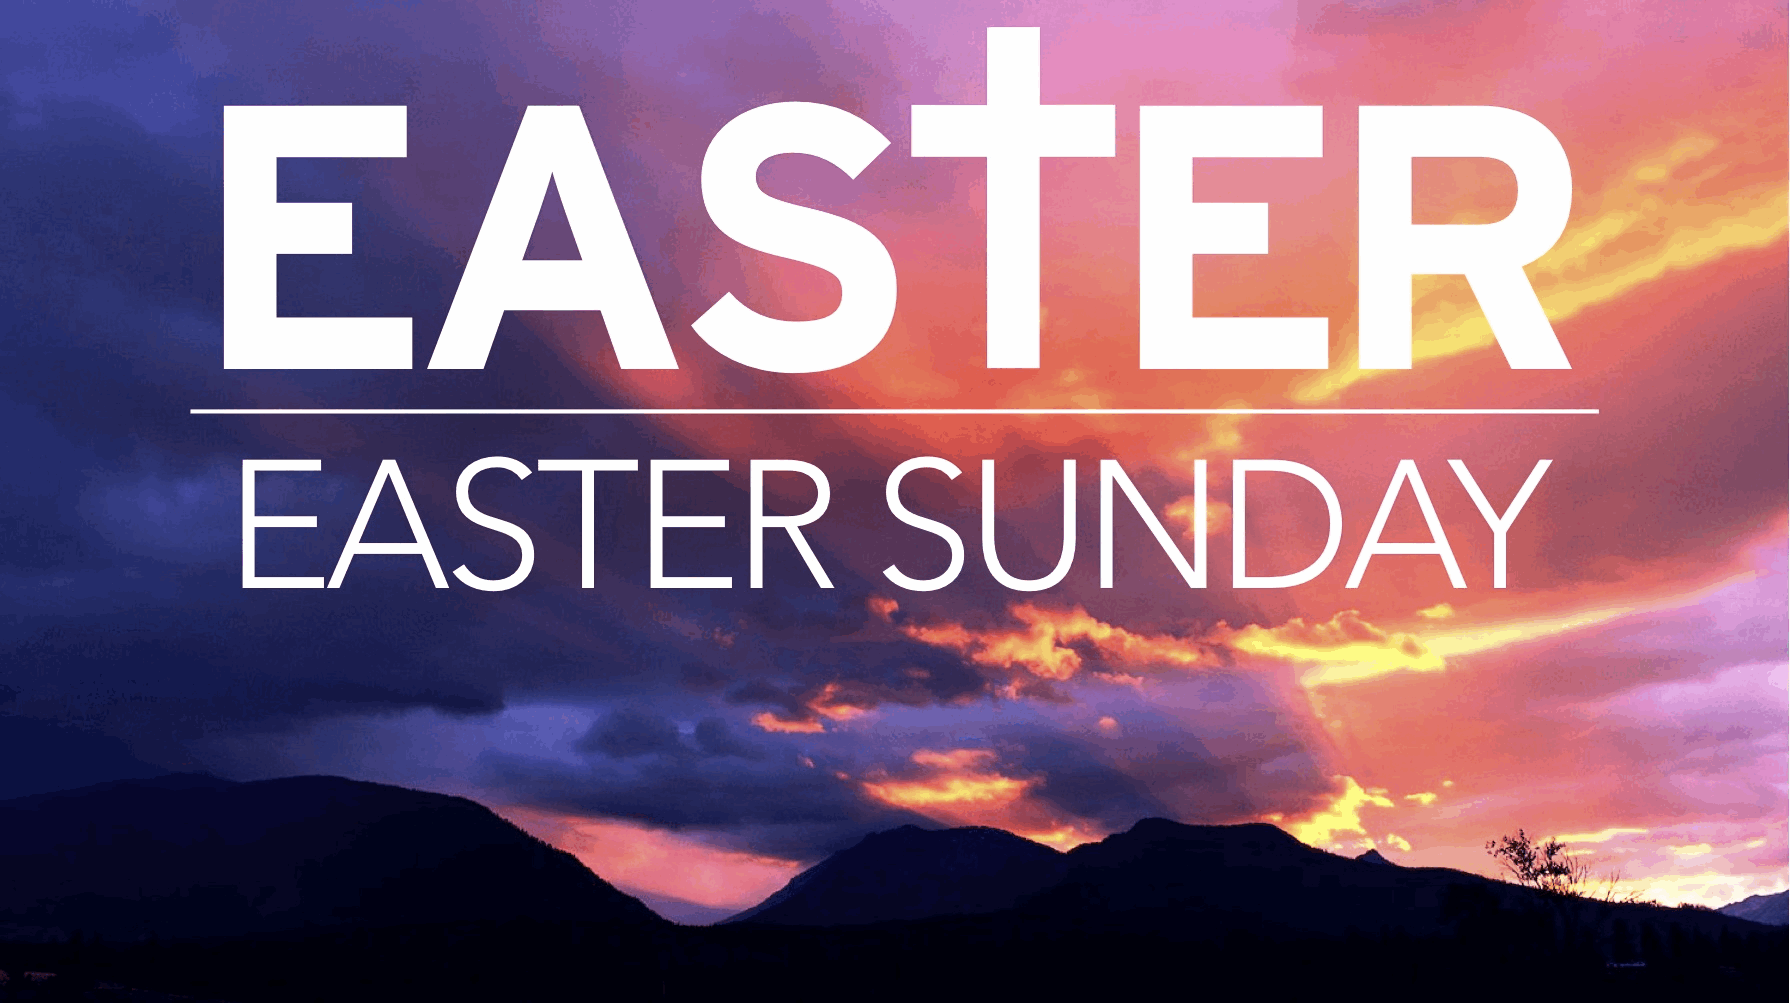 Best Easter Sunday 2017 Wish Picture And Image